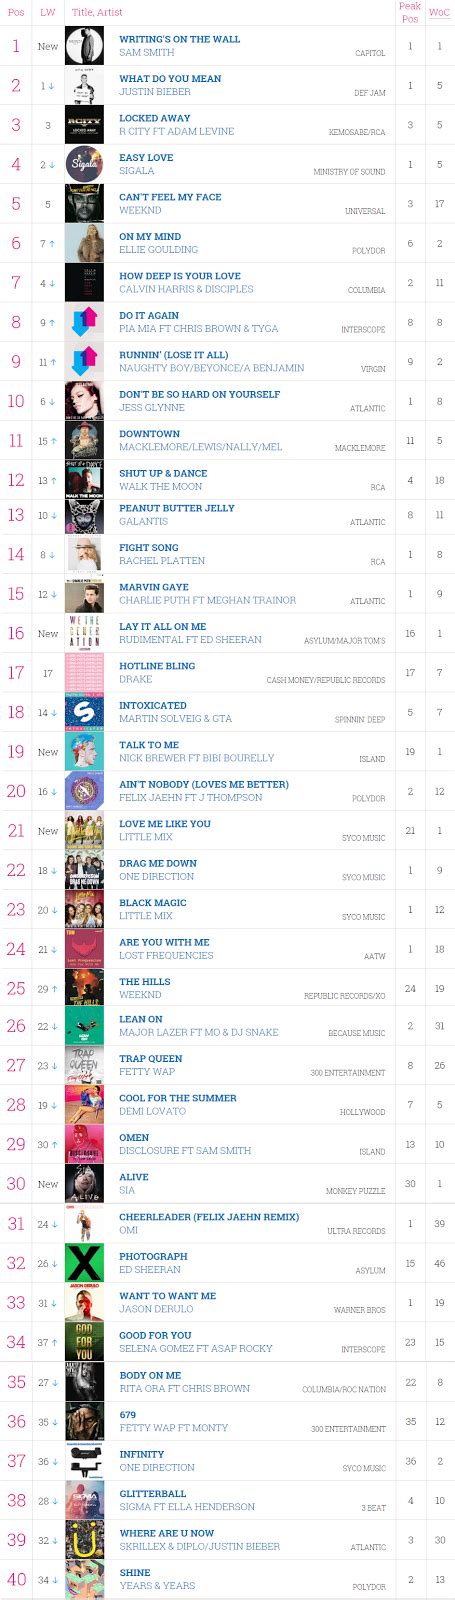 Uk Singles Chart Top 40 ~ Booklet Music